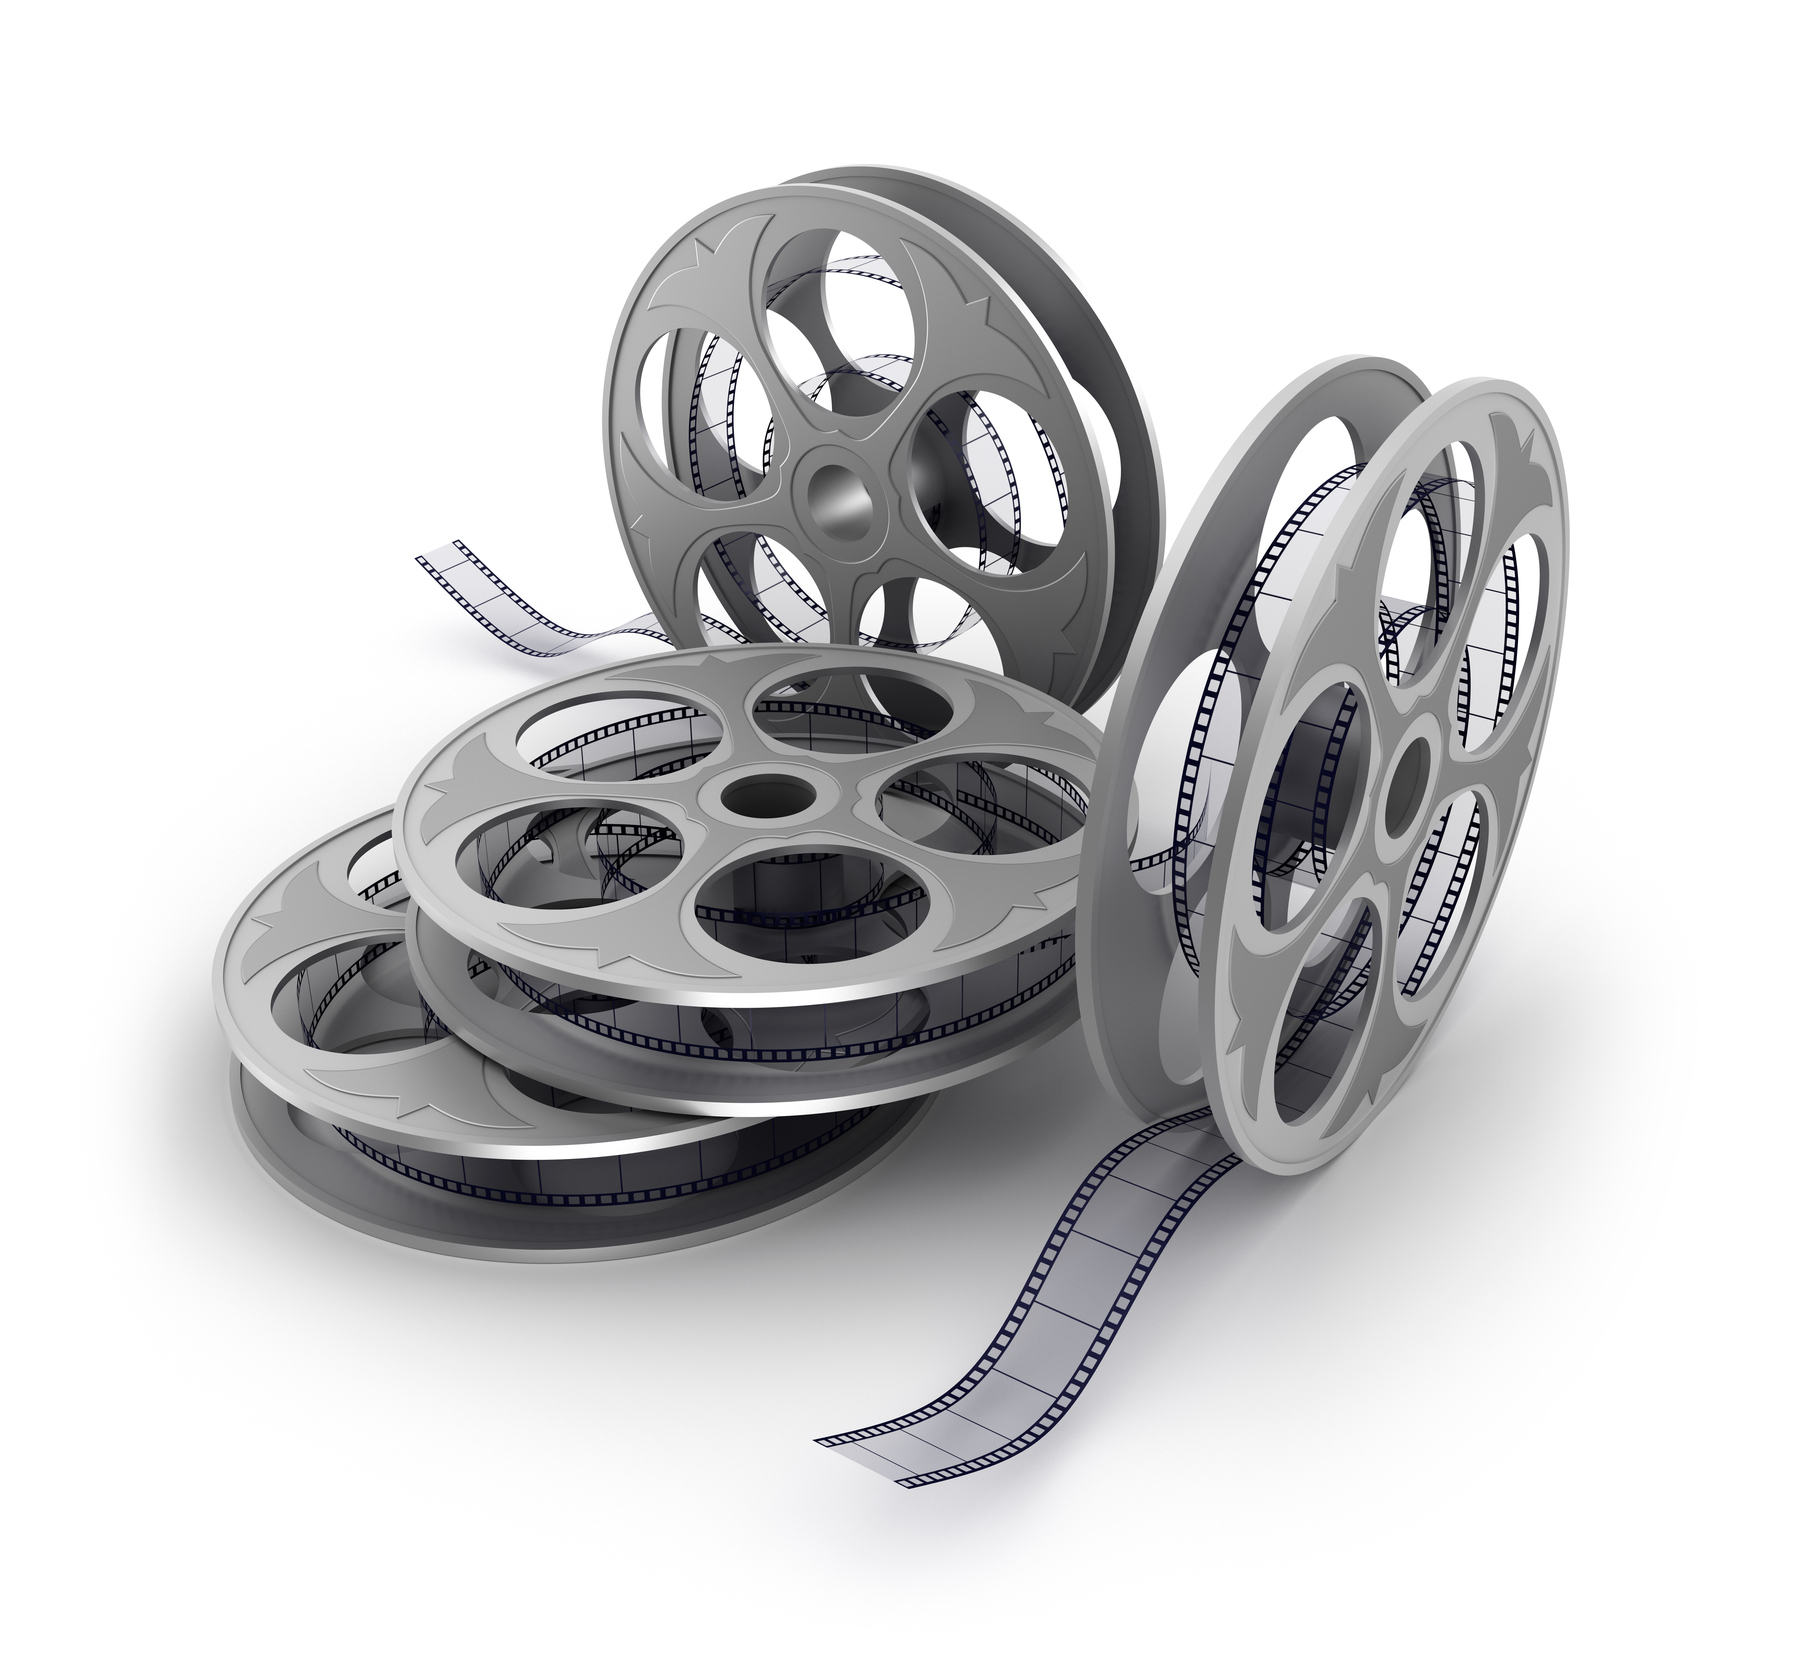 Best company to transfer 8mm film to dvd, Prepaid 8mm Reels to DVD Box